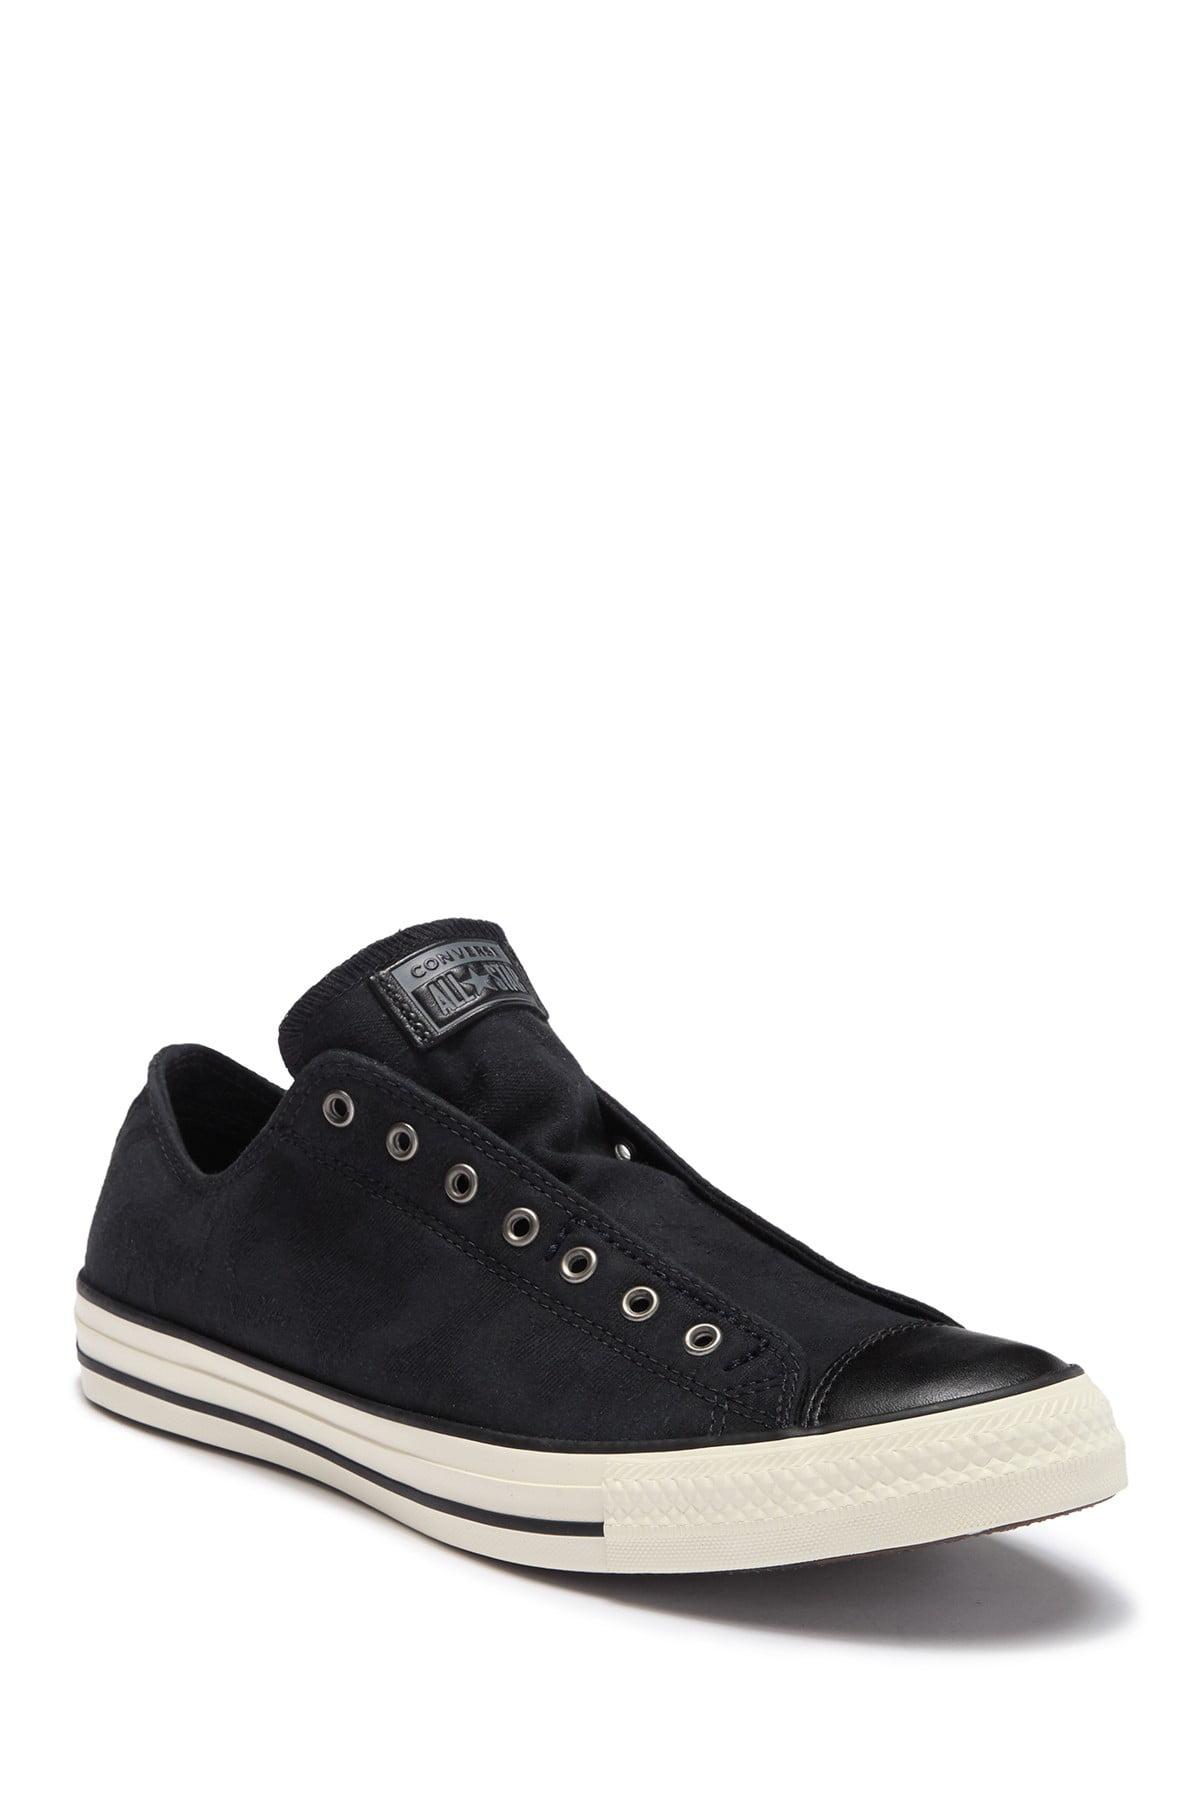 Rafflesia Arnoldi luchthaven dynastie Converse Chuck Taylor All Star Slip On Laceless Sneaker in Black for Men |  Lyst